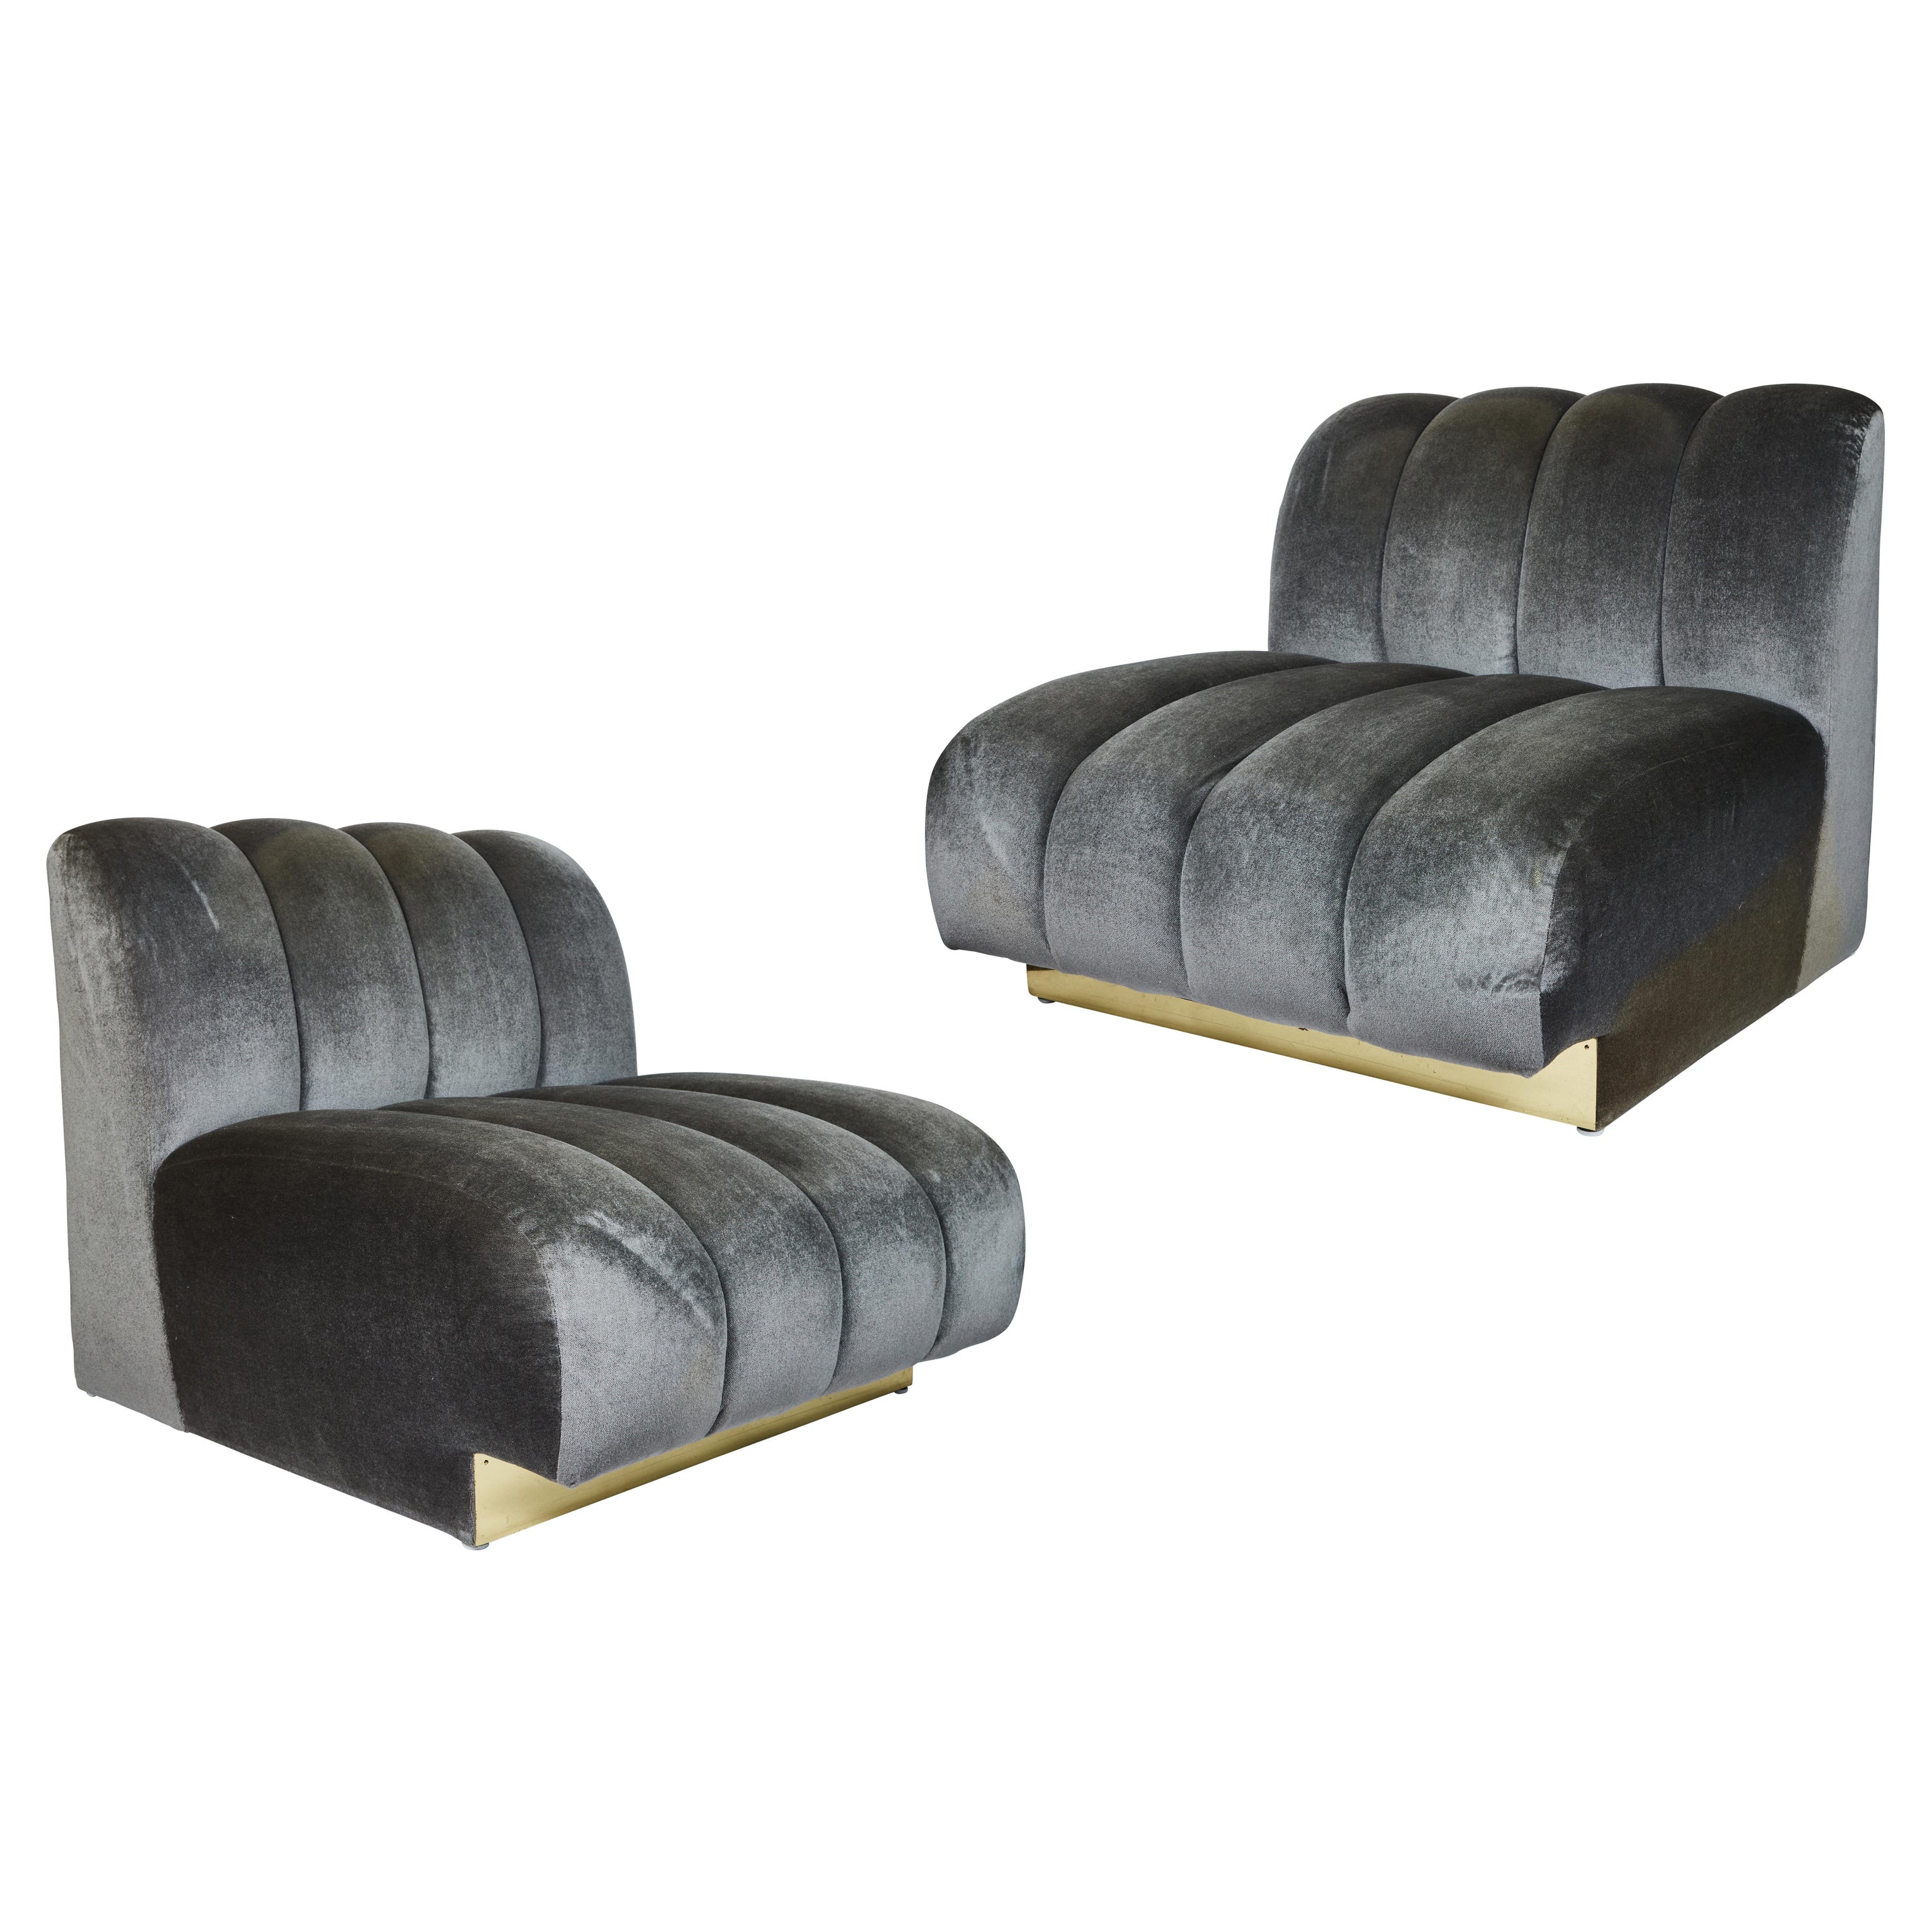 Pair of Channel Tufted Lounge Chairs by Steve Chase For Sale